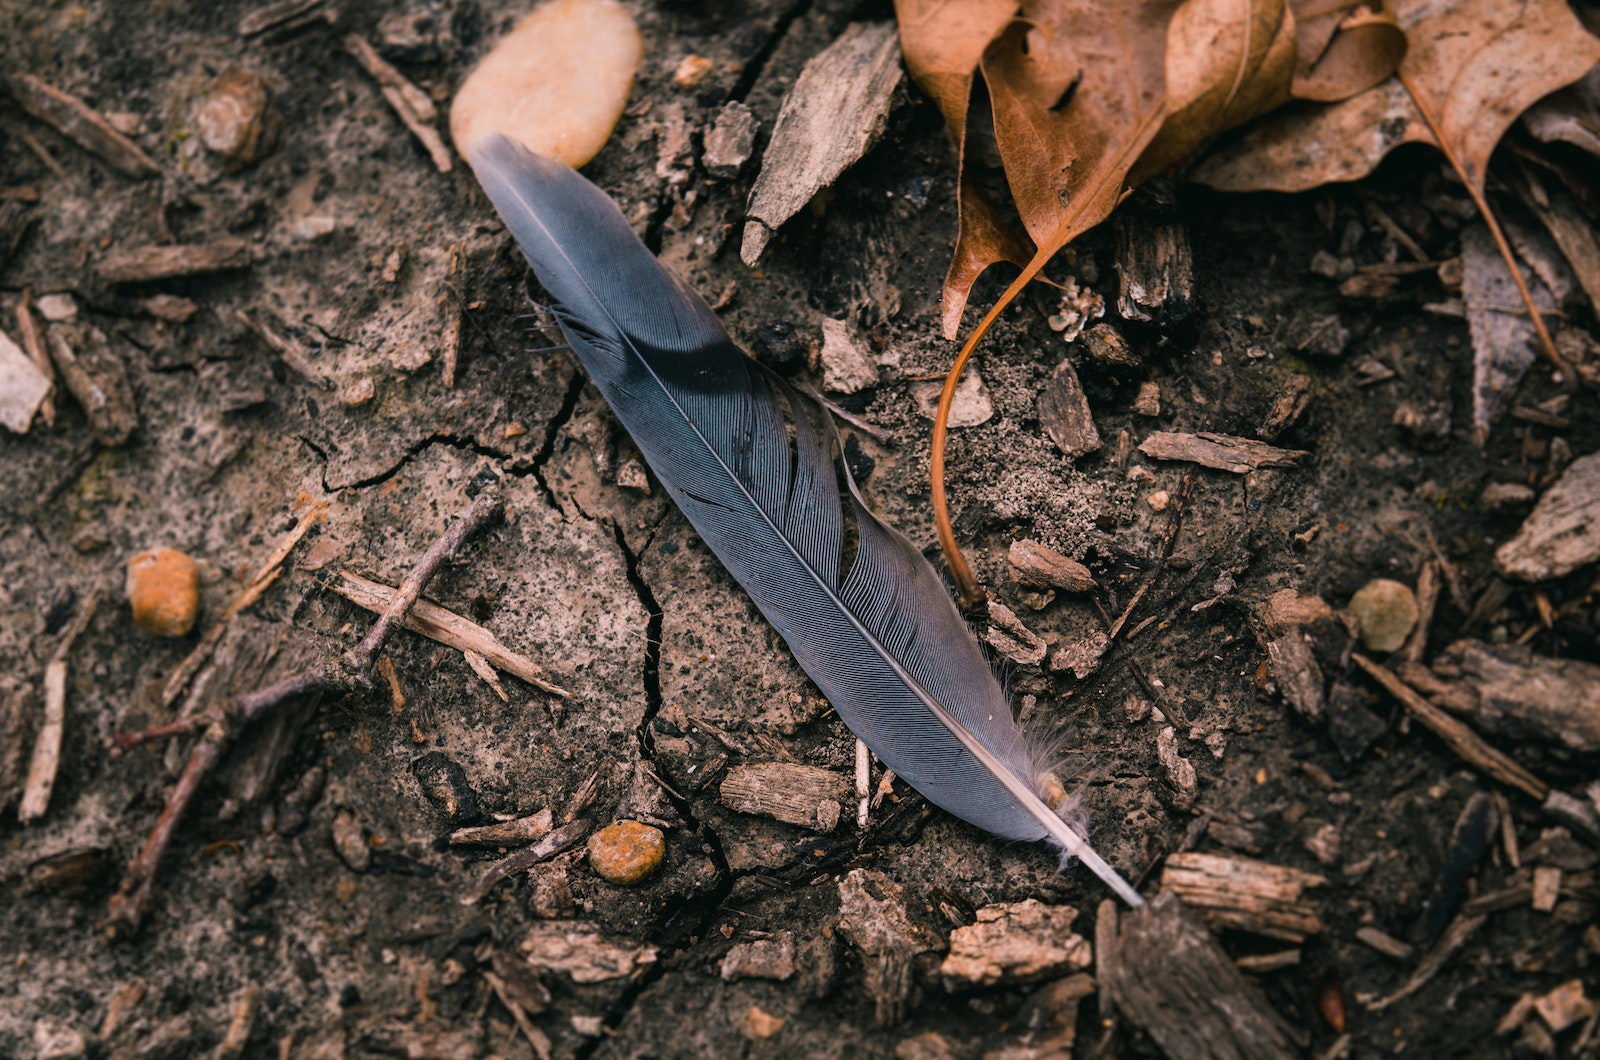 Black Feather Surrounded by Dried Leaves